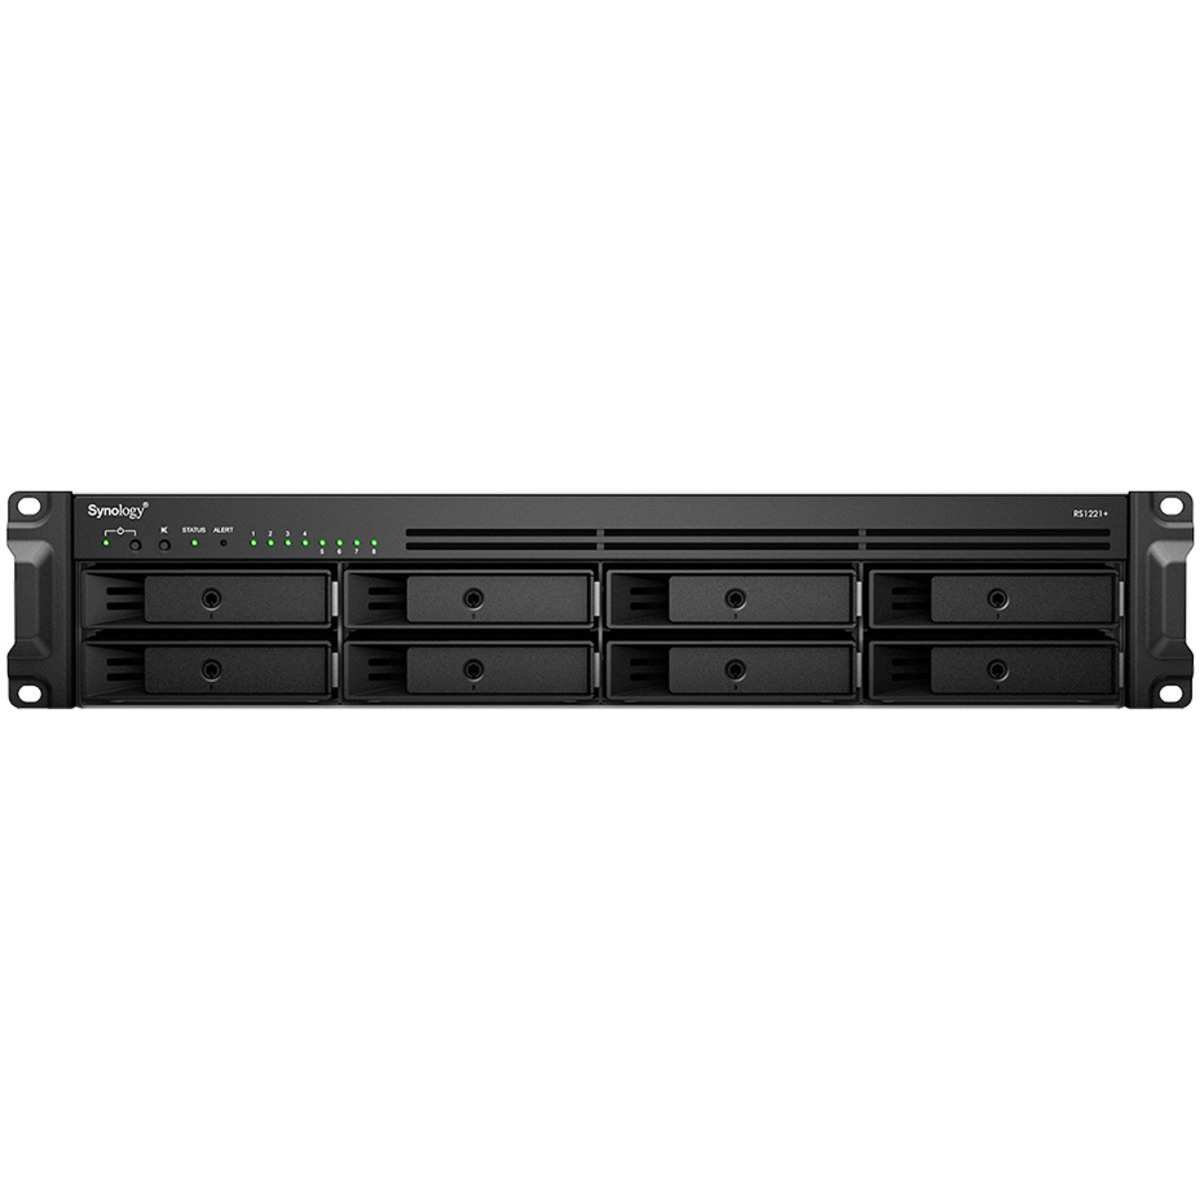 Synology RackStation RS1221RP+ 128tb 8-Bay RackMount Multimedia / Power User / Business NAS - Network Attached Storage Device 8x16tb Western Digital Red Pro WD161KFGX 3.5 7200rpm SATA 6Gb/s HDD NAS Class Drives Installed - Burn-In Tested - FREE RAM UPGRADE RackStation RS1221RP+